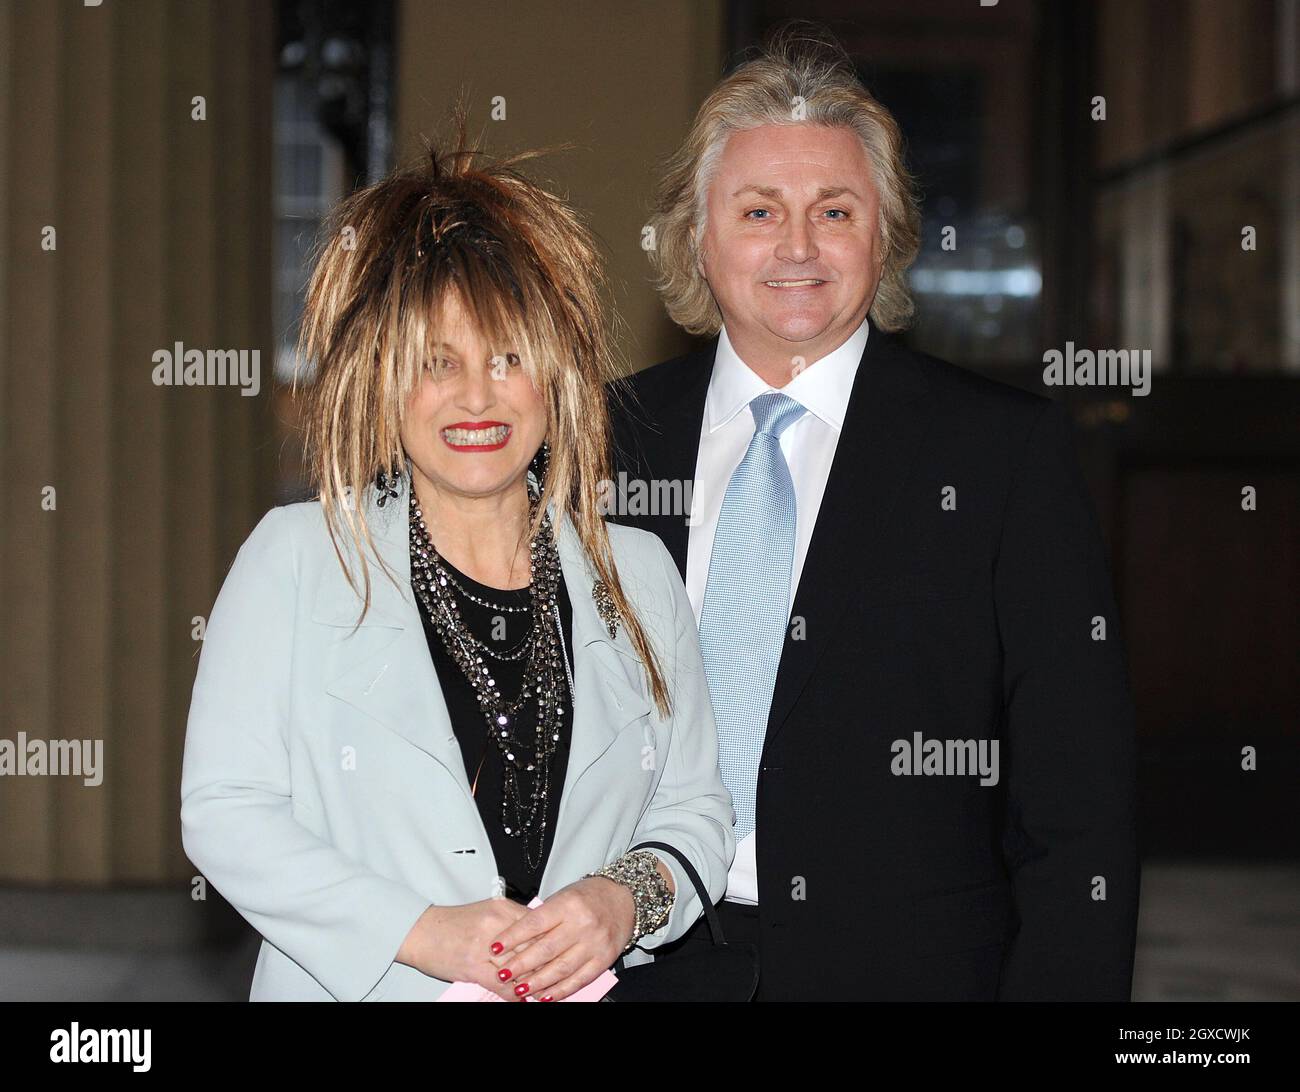 **FILE PHOTO** Fashion designers Elizabeth and David Emanuel arrive for a reception for the British Clothing Industry at Buckingham Palace on March 16, 2010. Designers Elizabeth and David Emanuel are holding an auction of dresses worn by the late Princess Diana. The dresses are to go up for auction on June 8, 2010 in London, at specialist vintage fashion auctioneers Kerry Taylor Auctions. Stock Photo